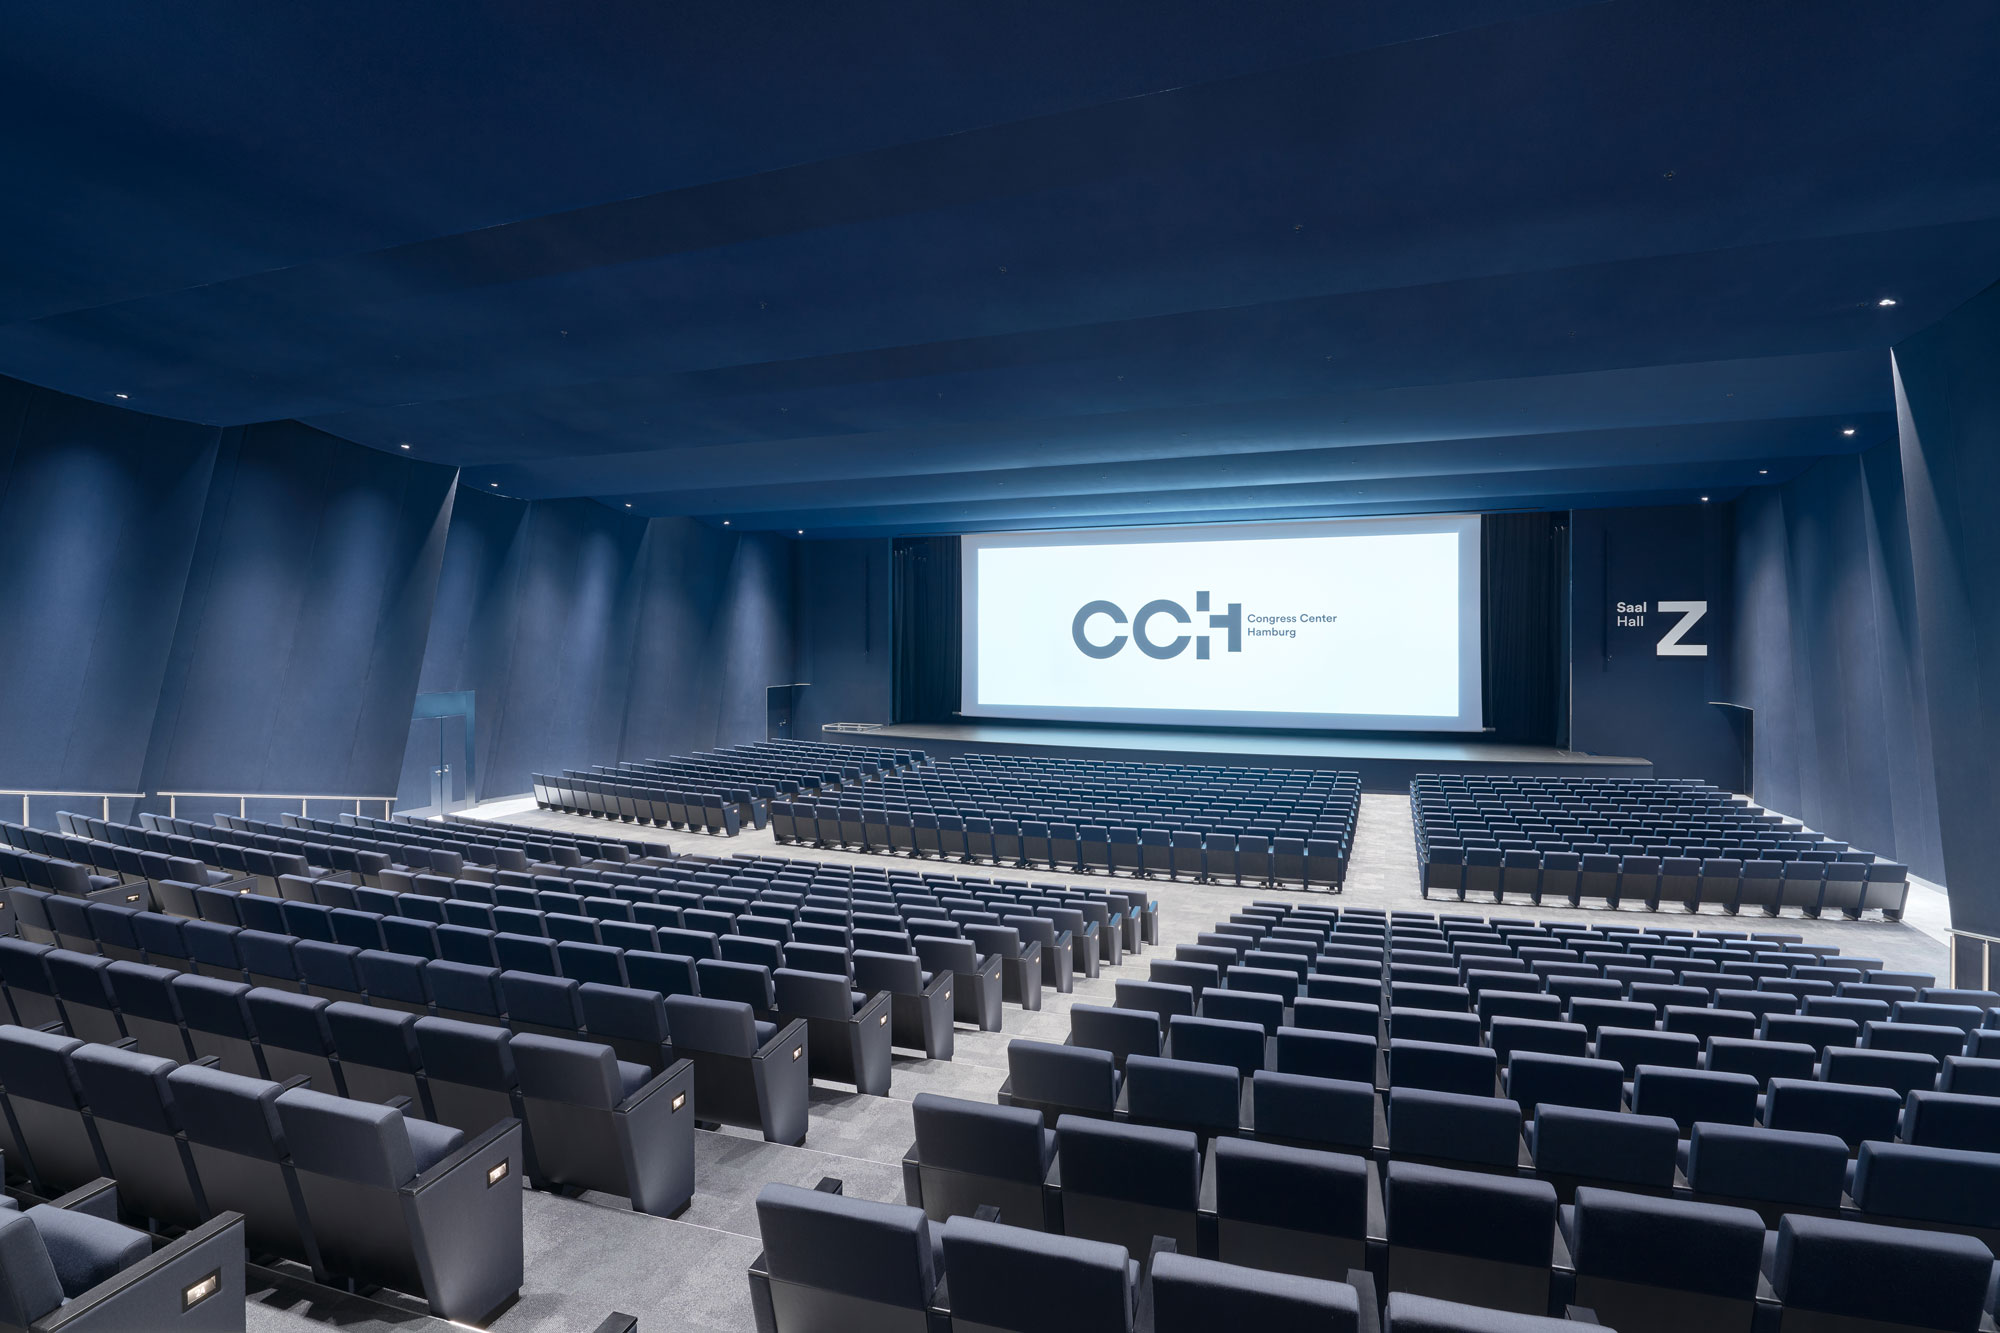 CCH Saal Z